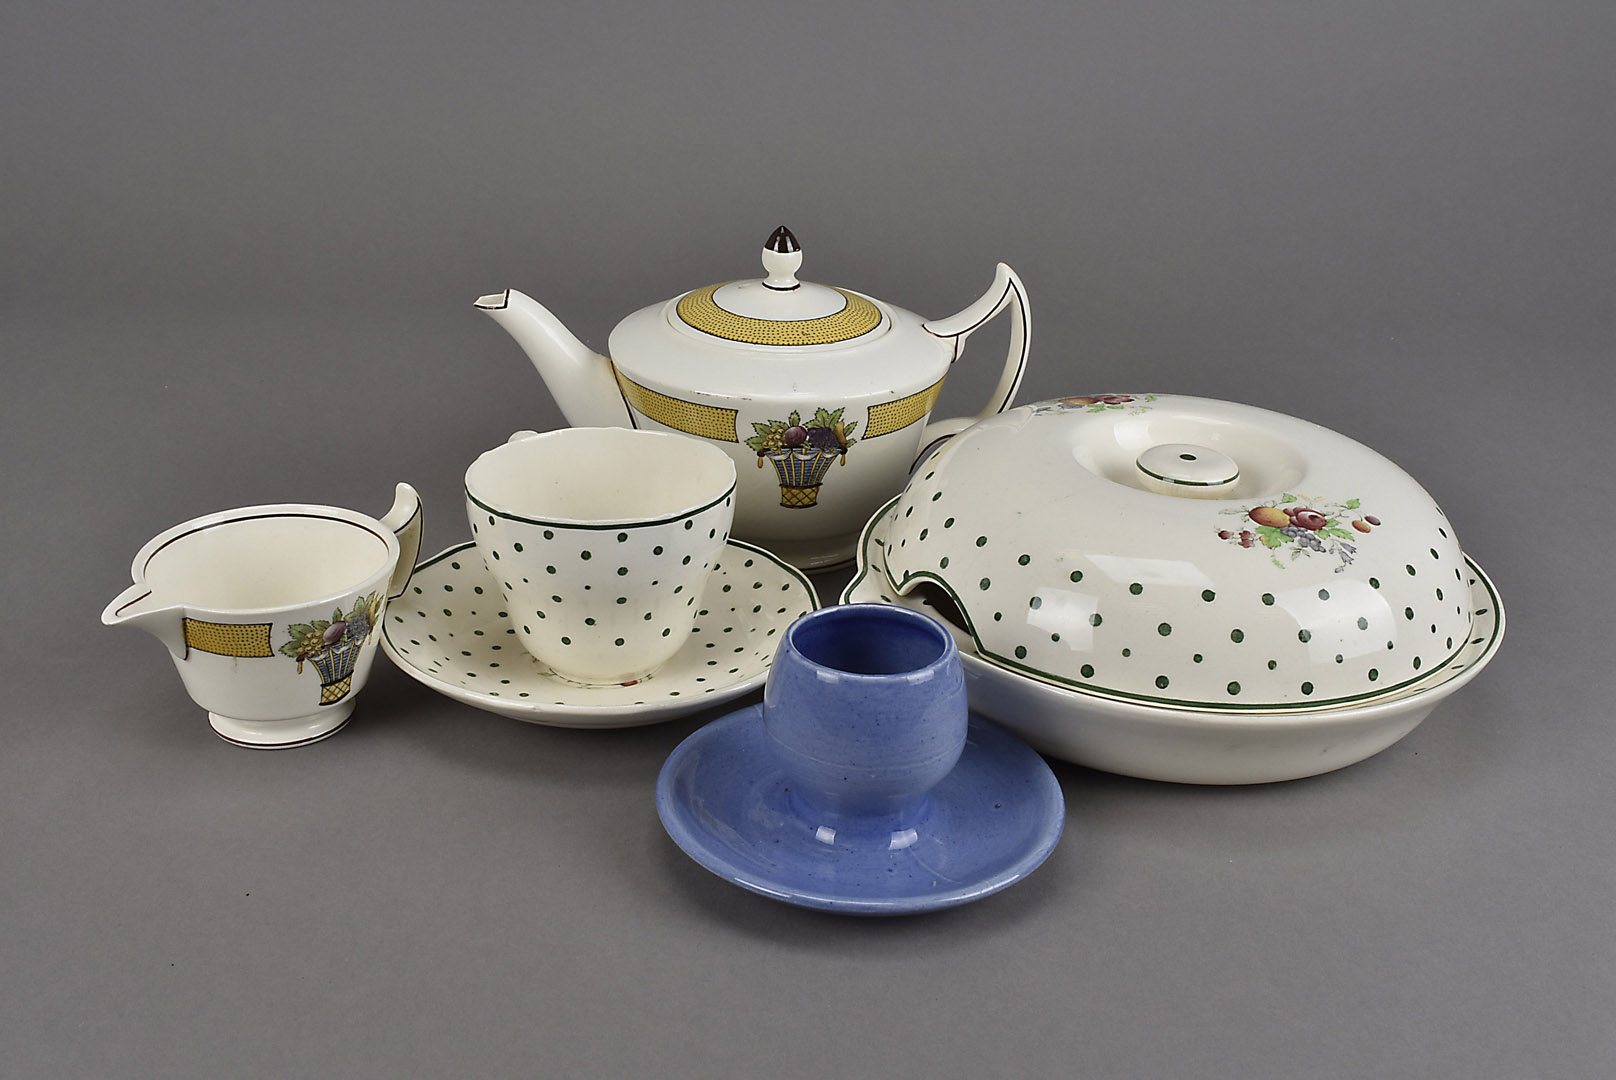 A collection of mid-20th century breakfast ware, including Ashbead Pottery, Spode, Wedgwood, and